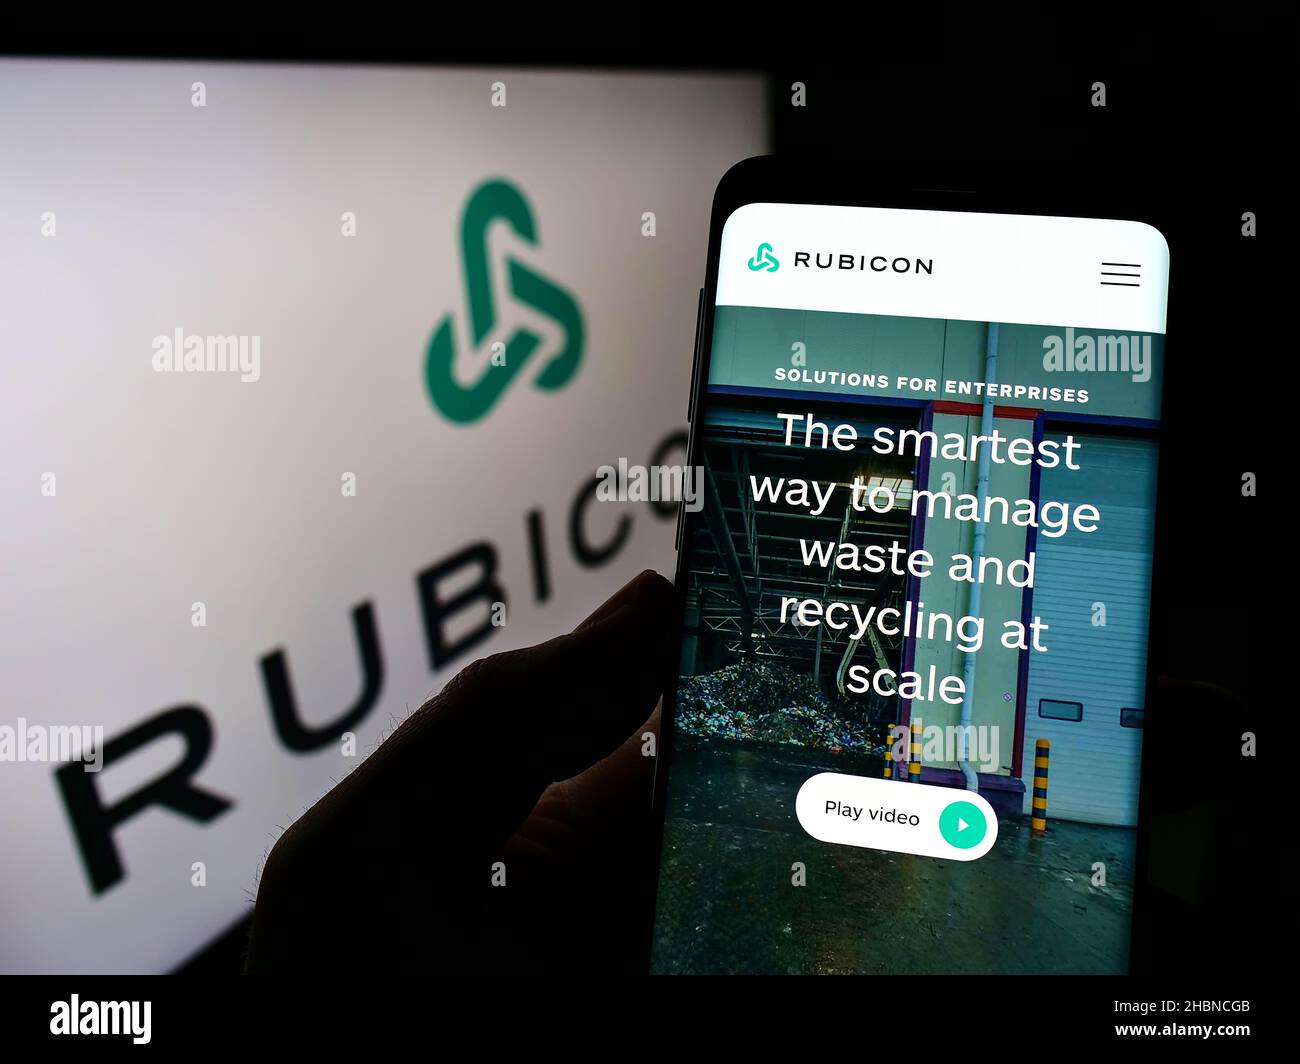 Person holding cellphone with website of US software company Rubicon Technologies LLC on screen in front of logo. Focus on center of phone display. Stock Photo